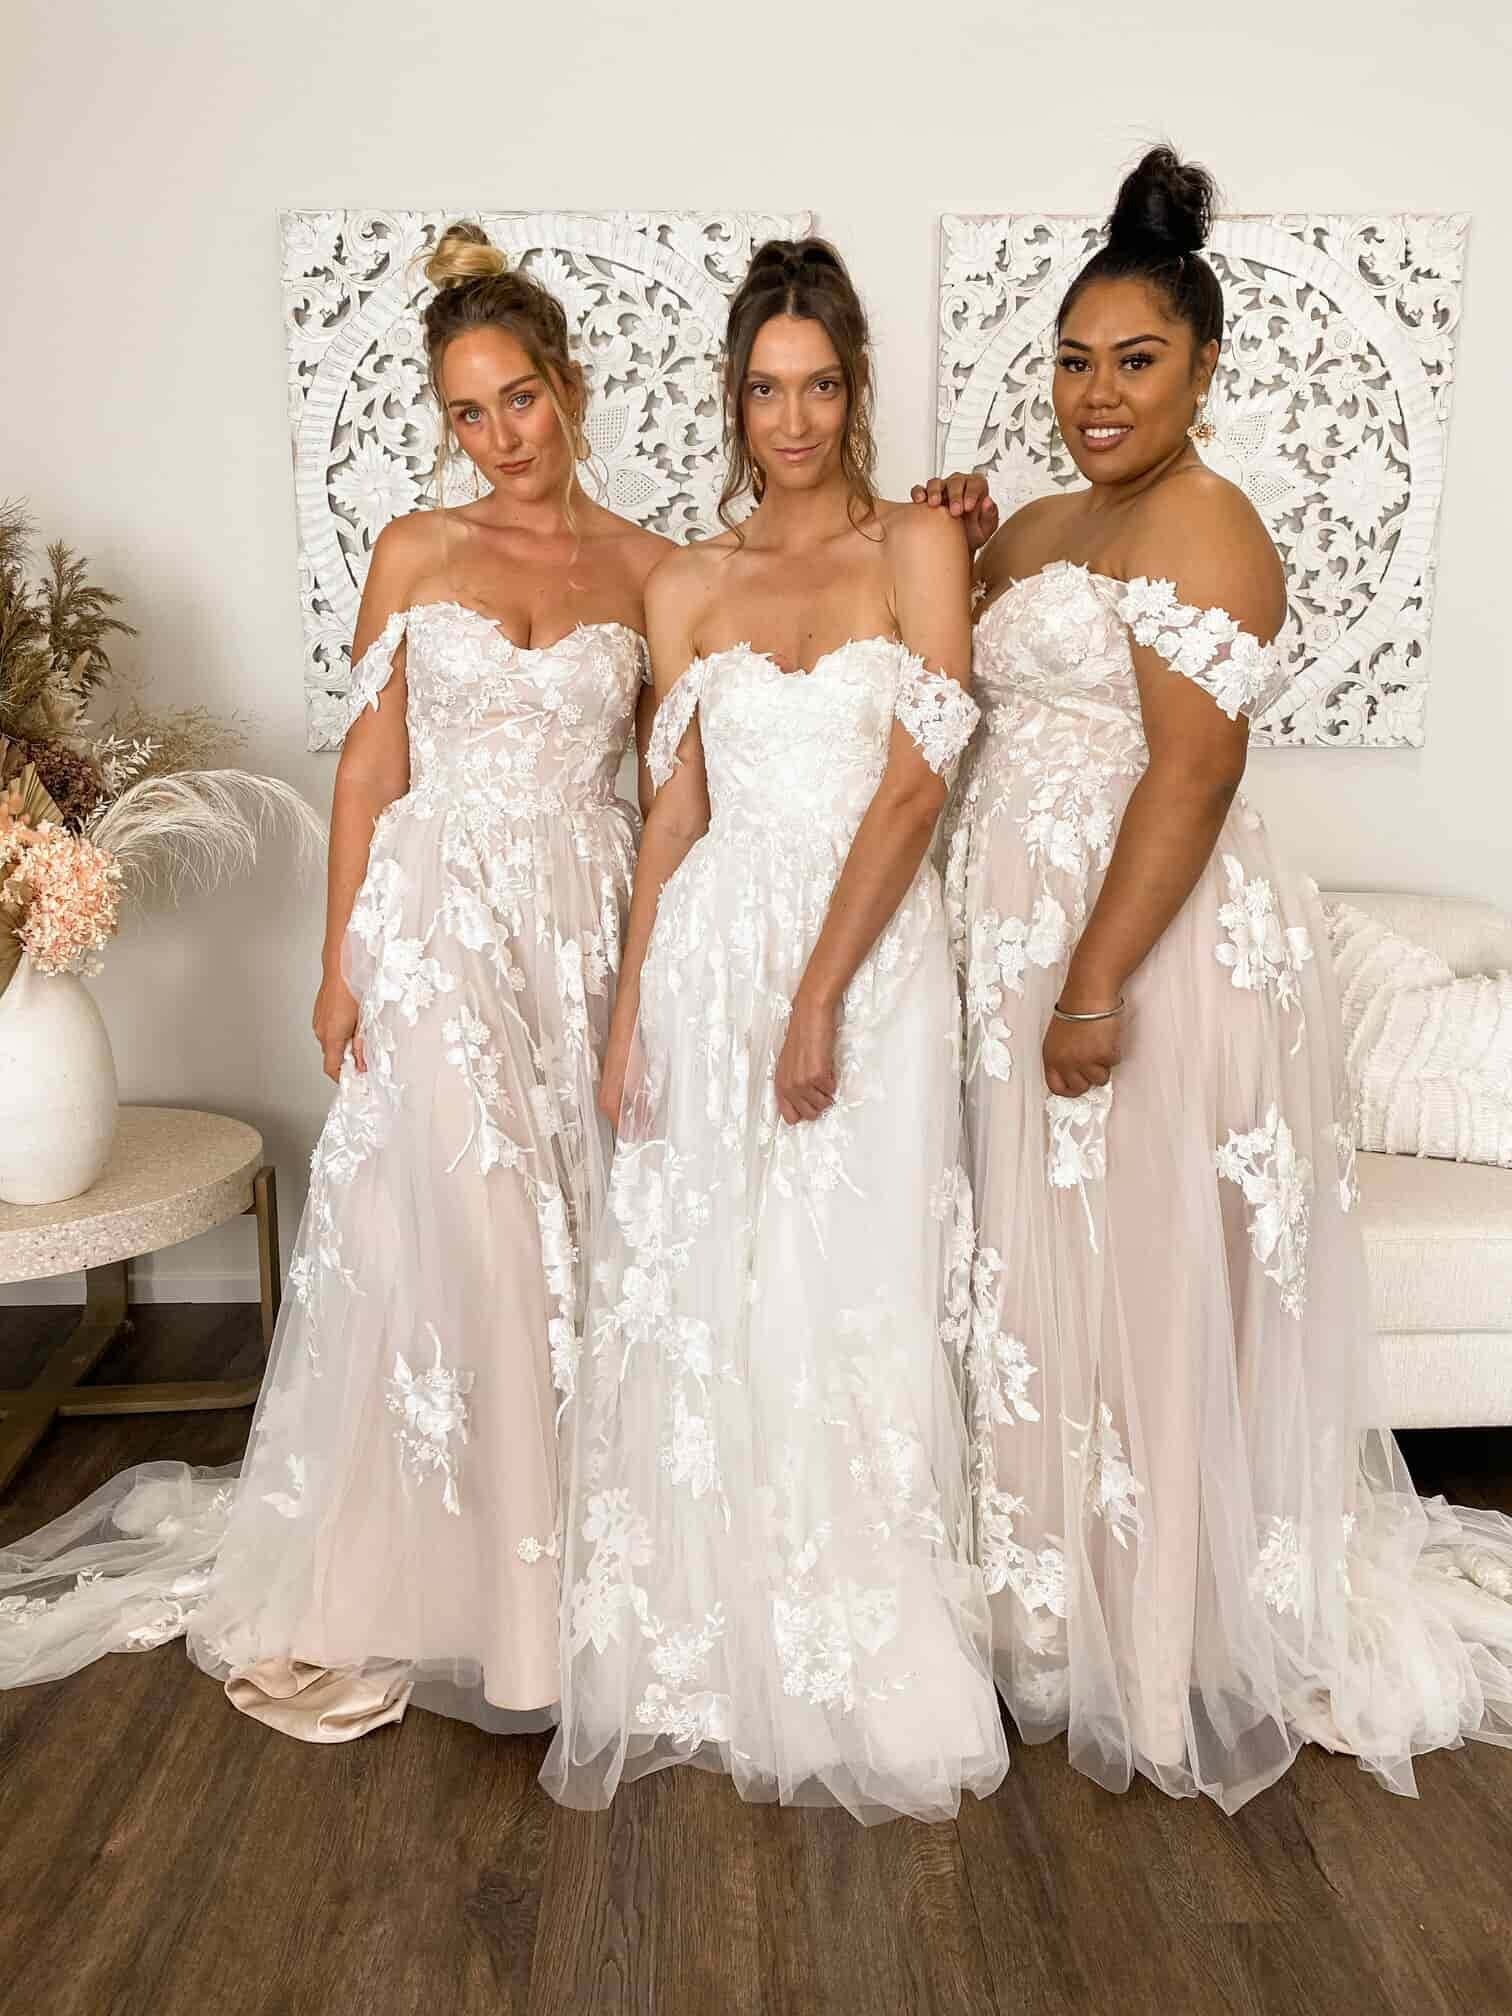 Photos of 3 real brides full height - mobile version